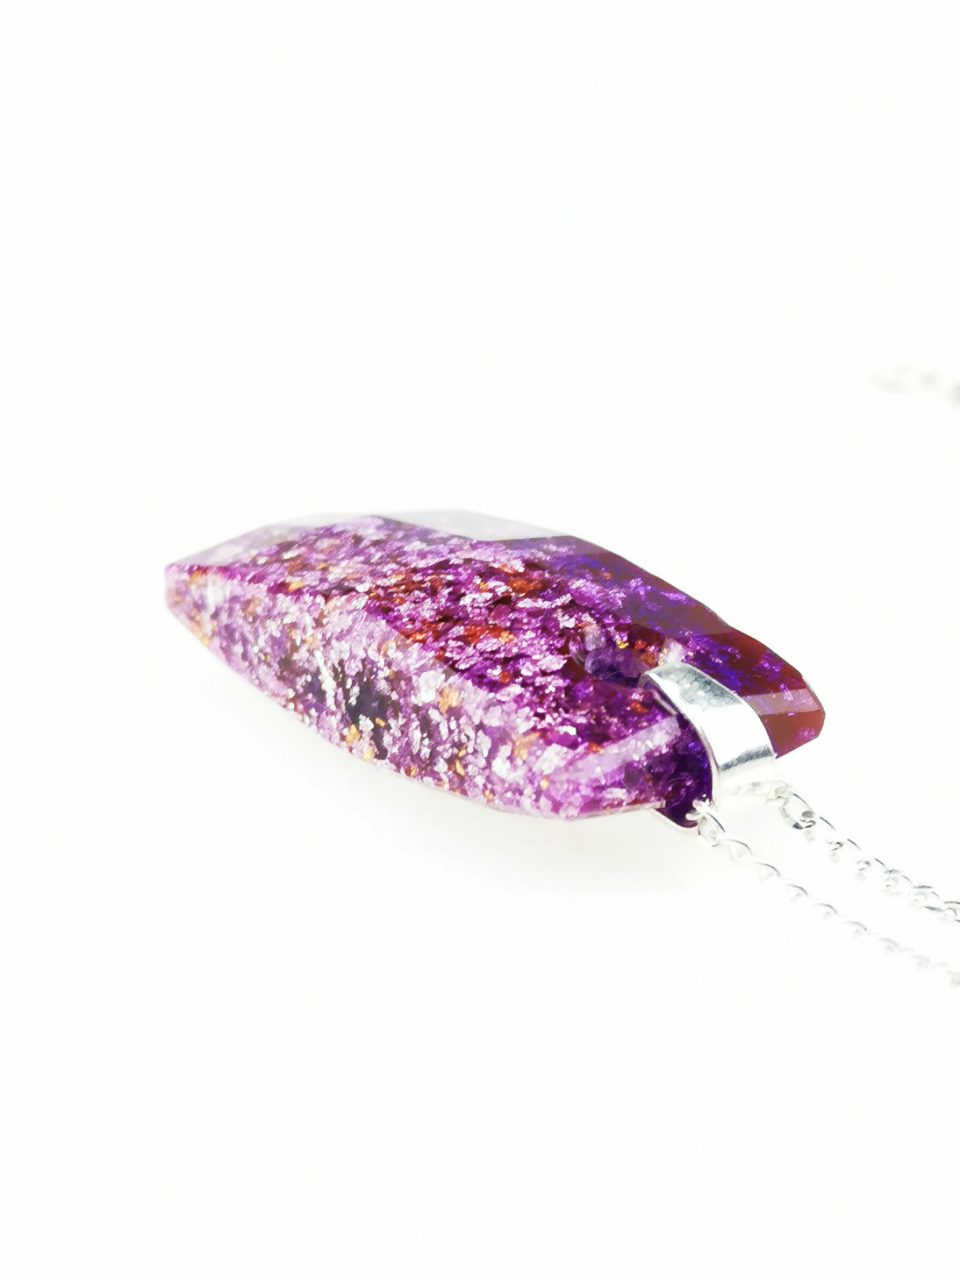 Violet Cushion Crystal Orgone Pendant by OrgoneVibes